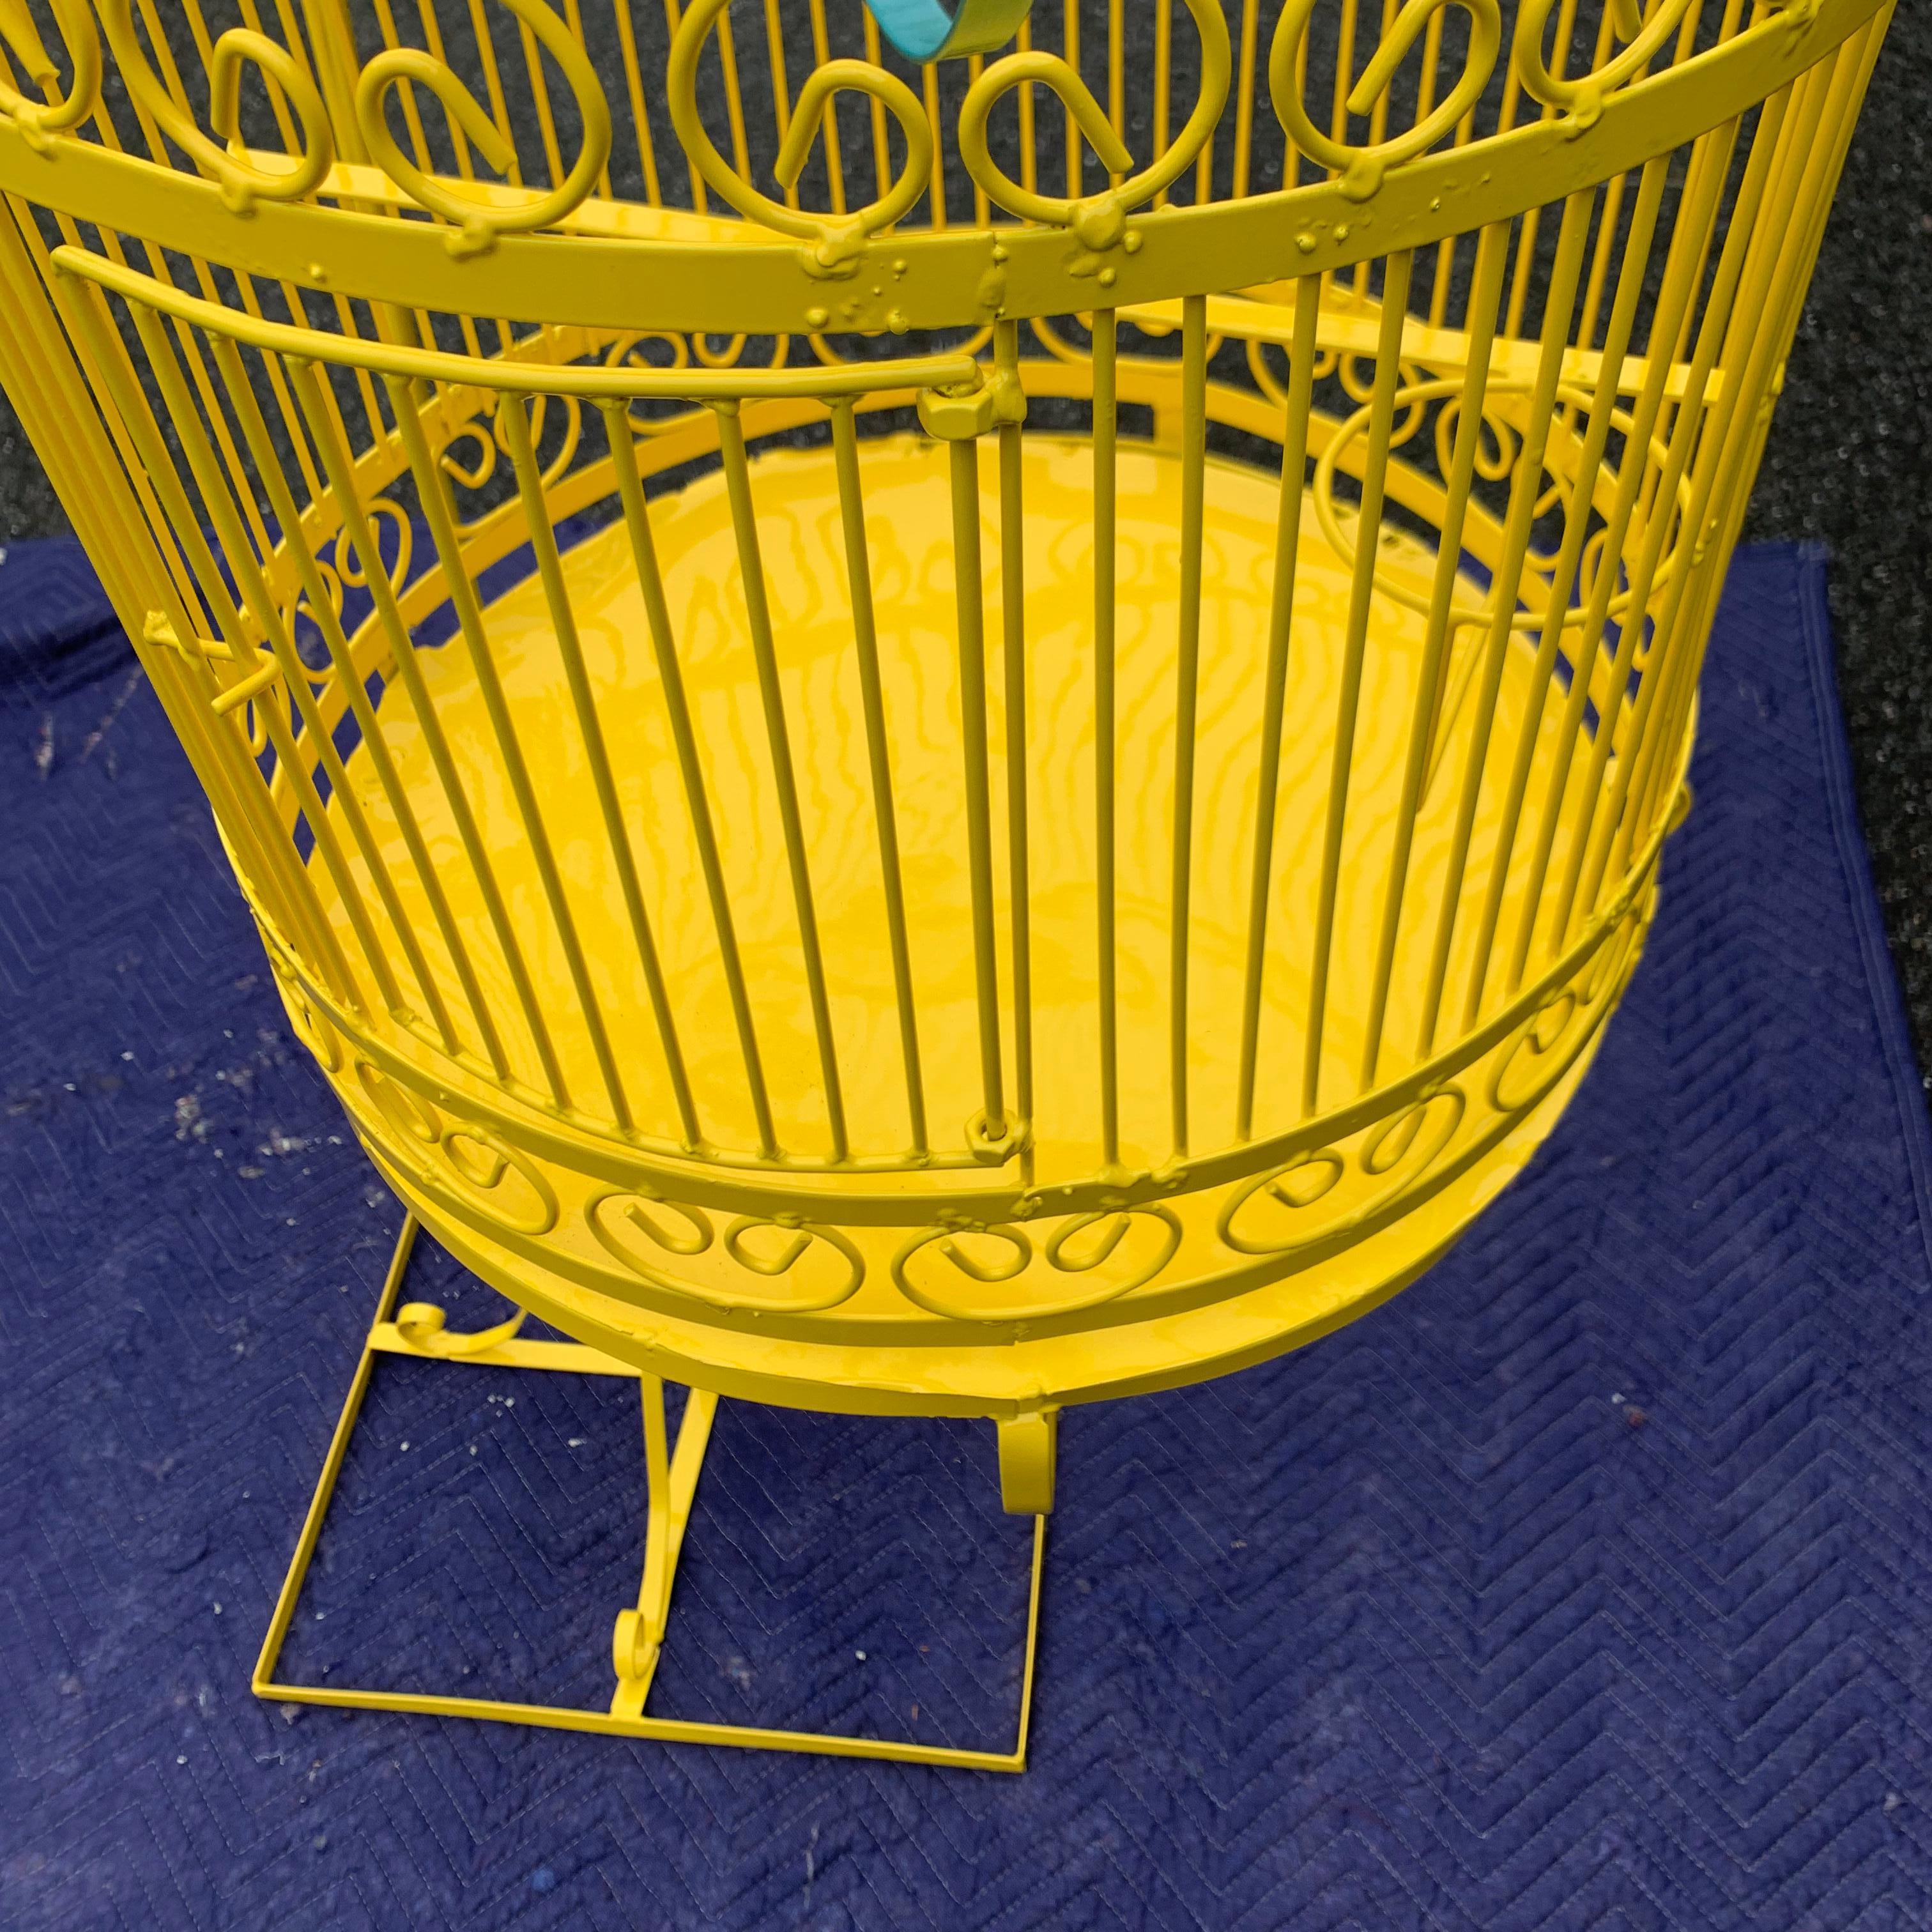 Vintage Metal Birdcage On Stand, Newly Powder-Coated In Bright Sunshine Yellow 2